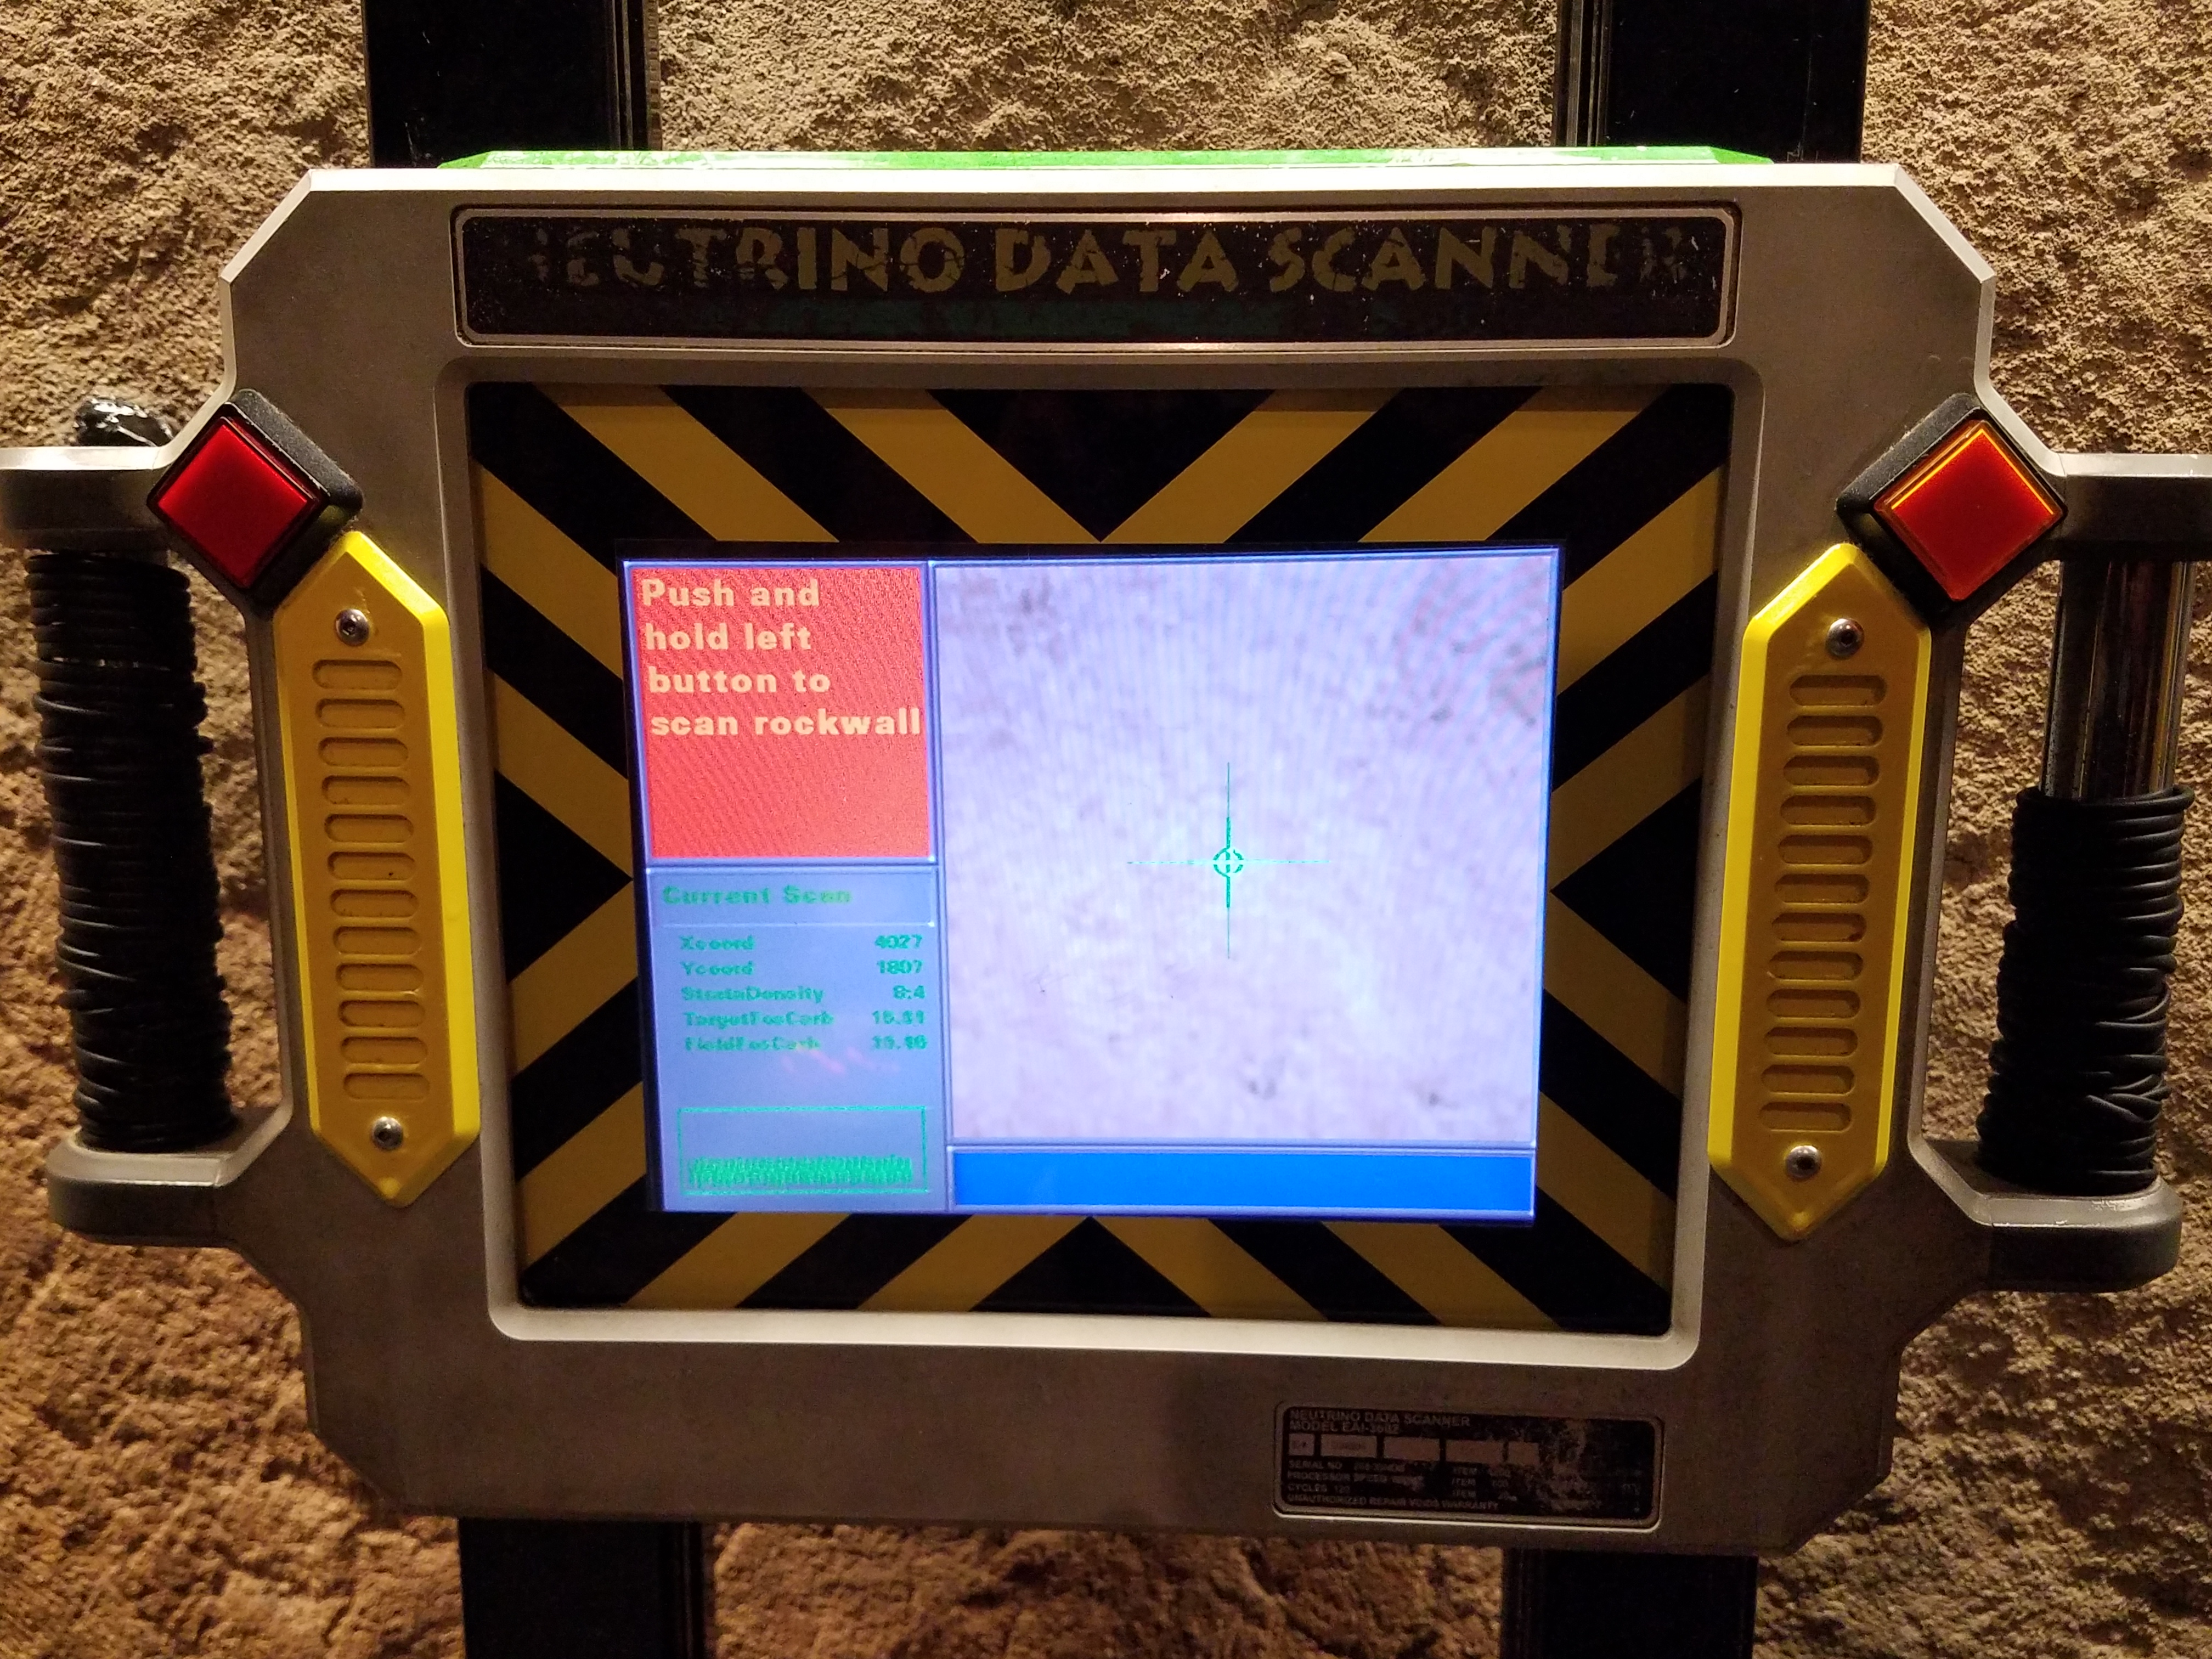 Interactive DNA sequencing activity in the Jurassic Park Discovery Center in Universal's Islands of Adventure - by unofficialuniversal.com.